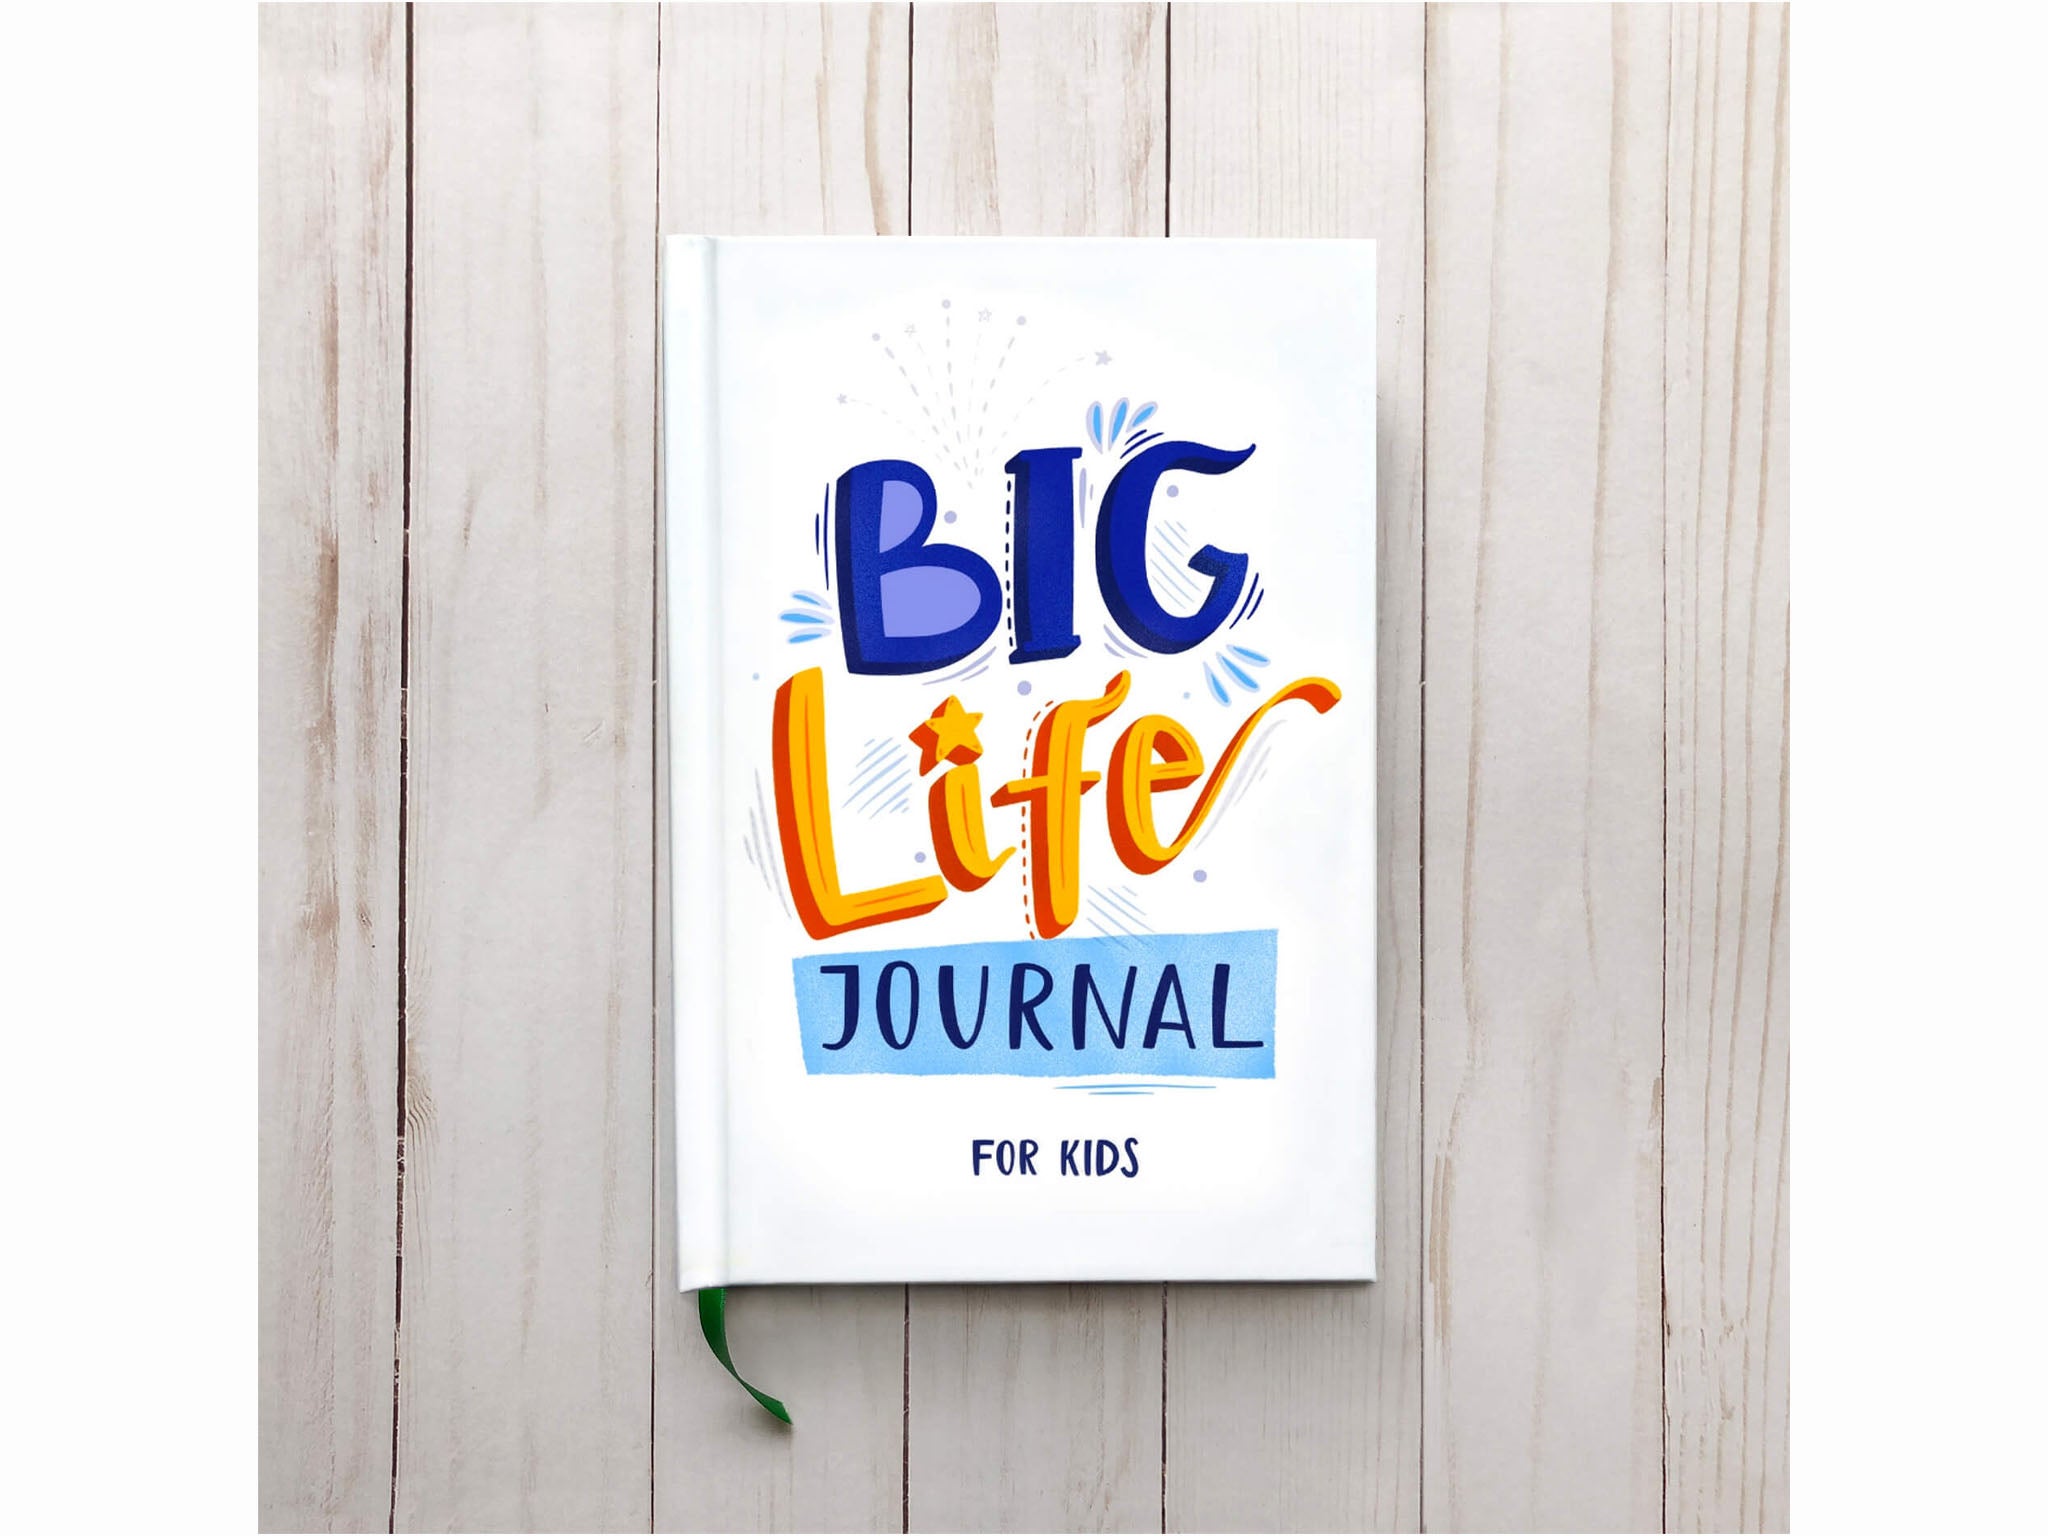 The Best Journals For Kids